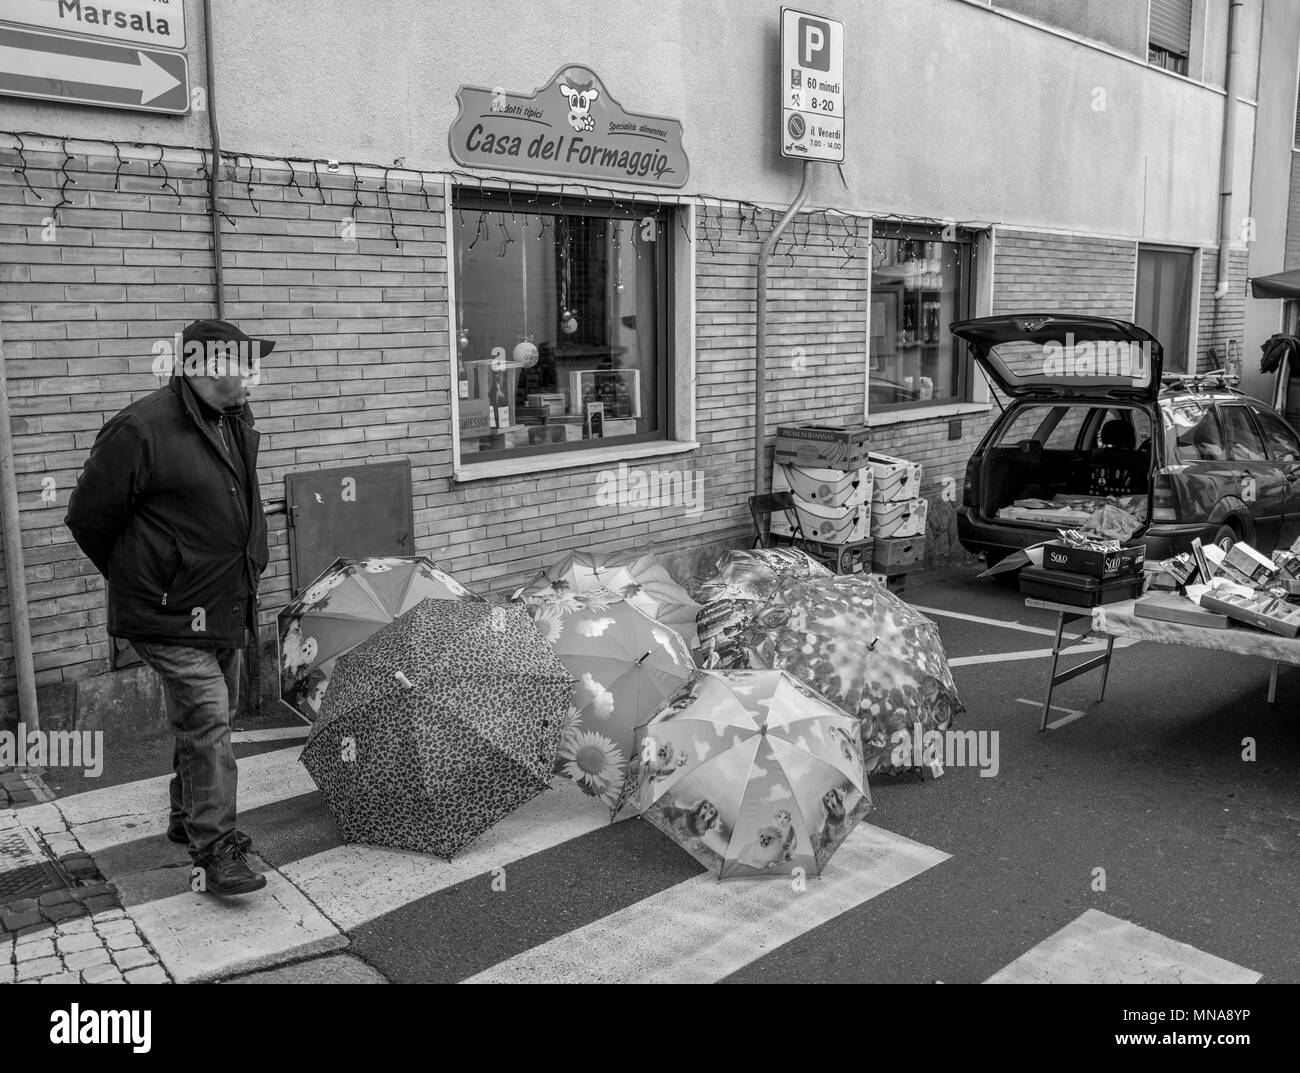 Gravirate, Lombardy, ITALY, View, Black&white, Saleman, selling, from the, back of a car, Umbrellas, displayed, in the street, for sale, at the, Friday Market,  Italy,  30/12/2016,     [© Peter SPURRIER], Stock Photo